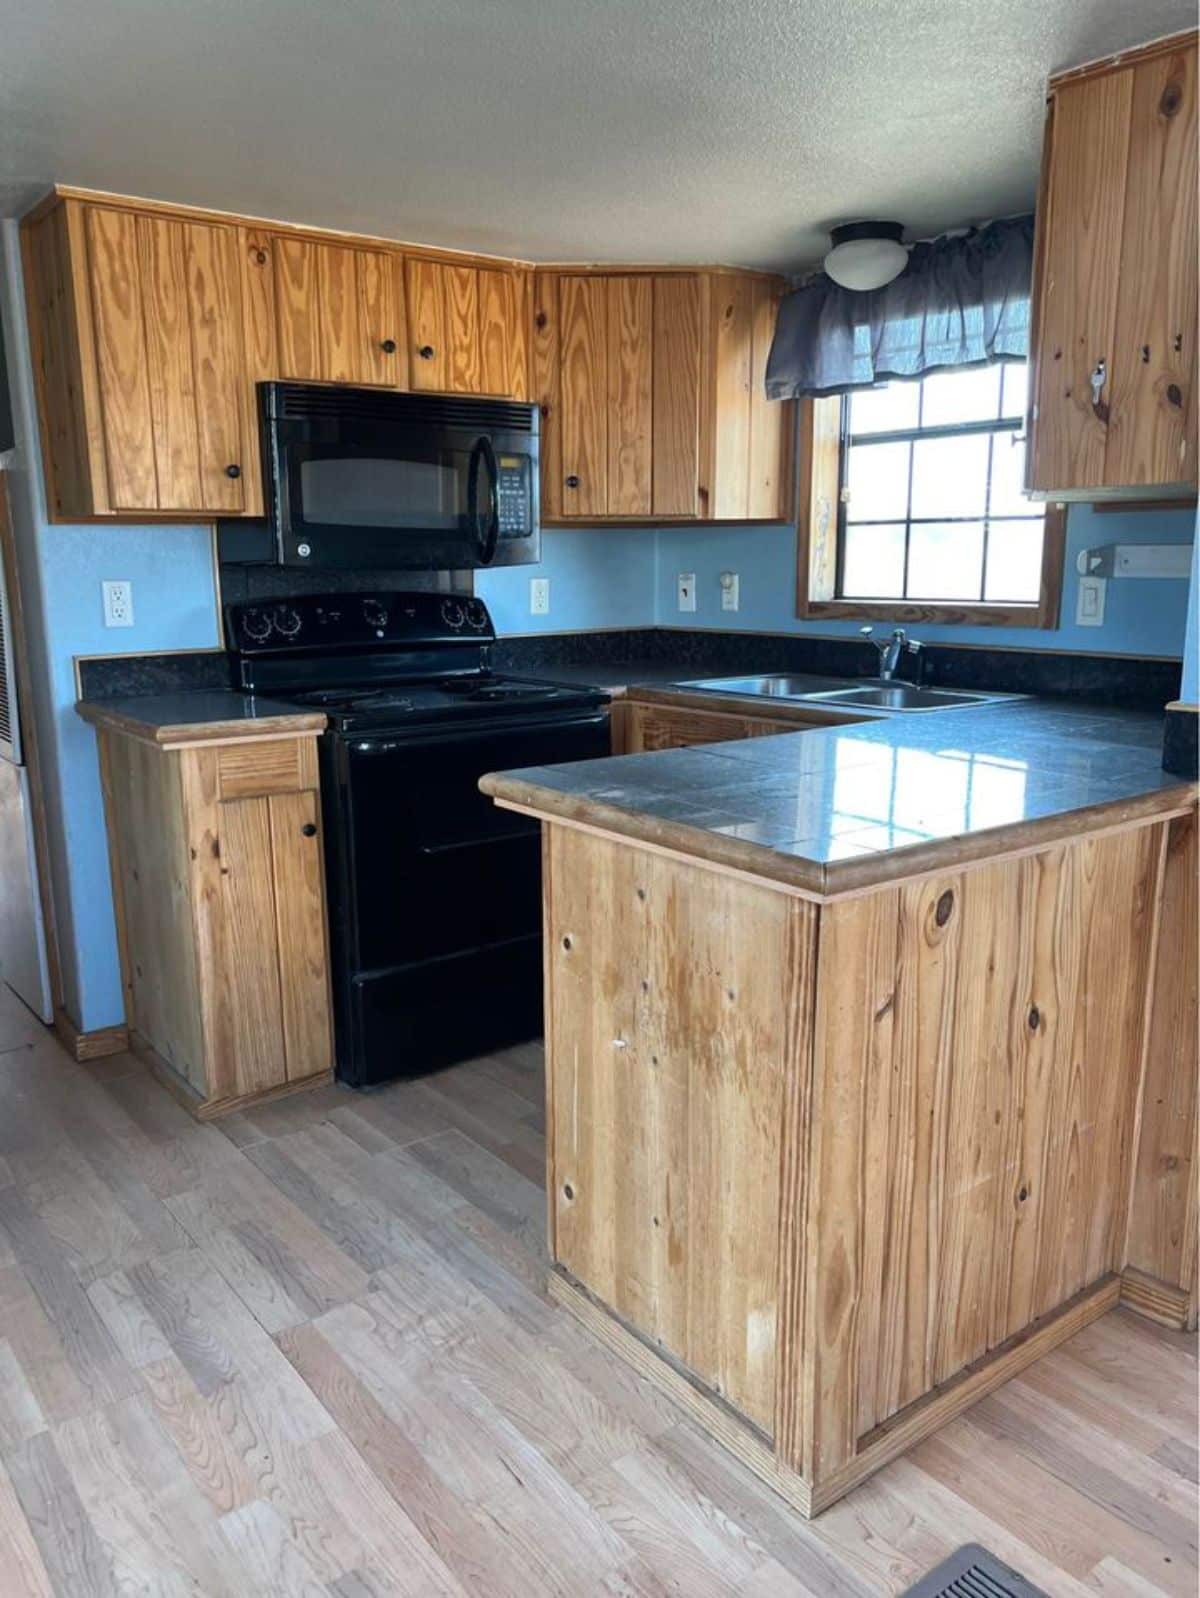 Open Kitchen area of 40’ Tiny Home has a oven cum stove, sink, counter top and refrigerator